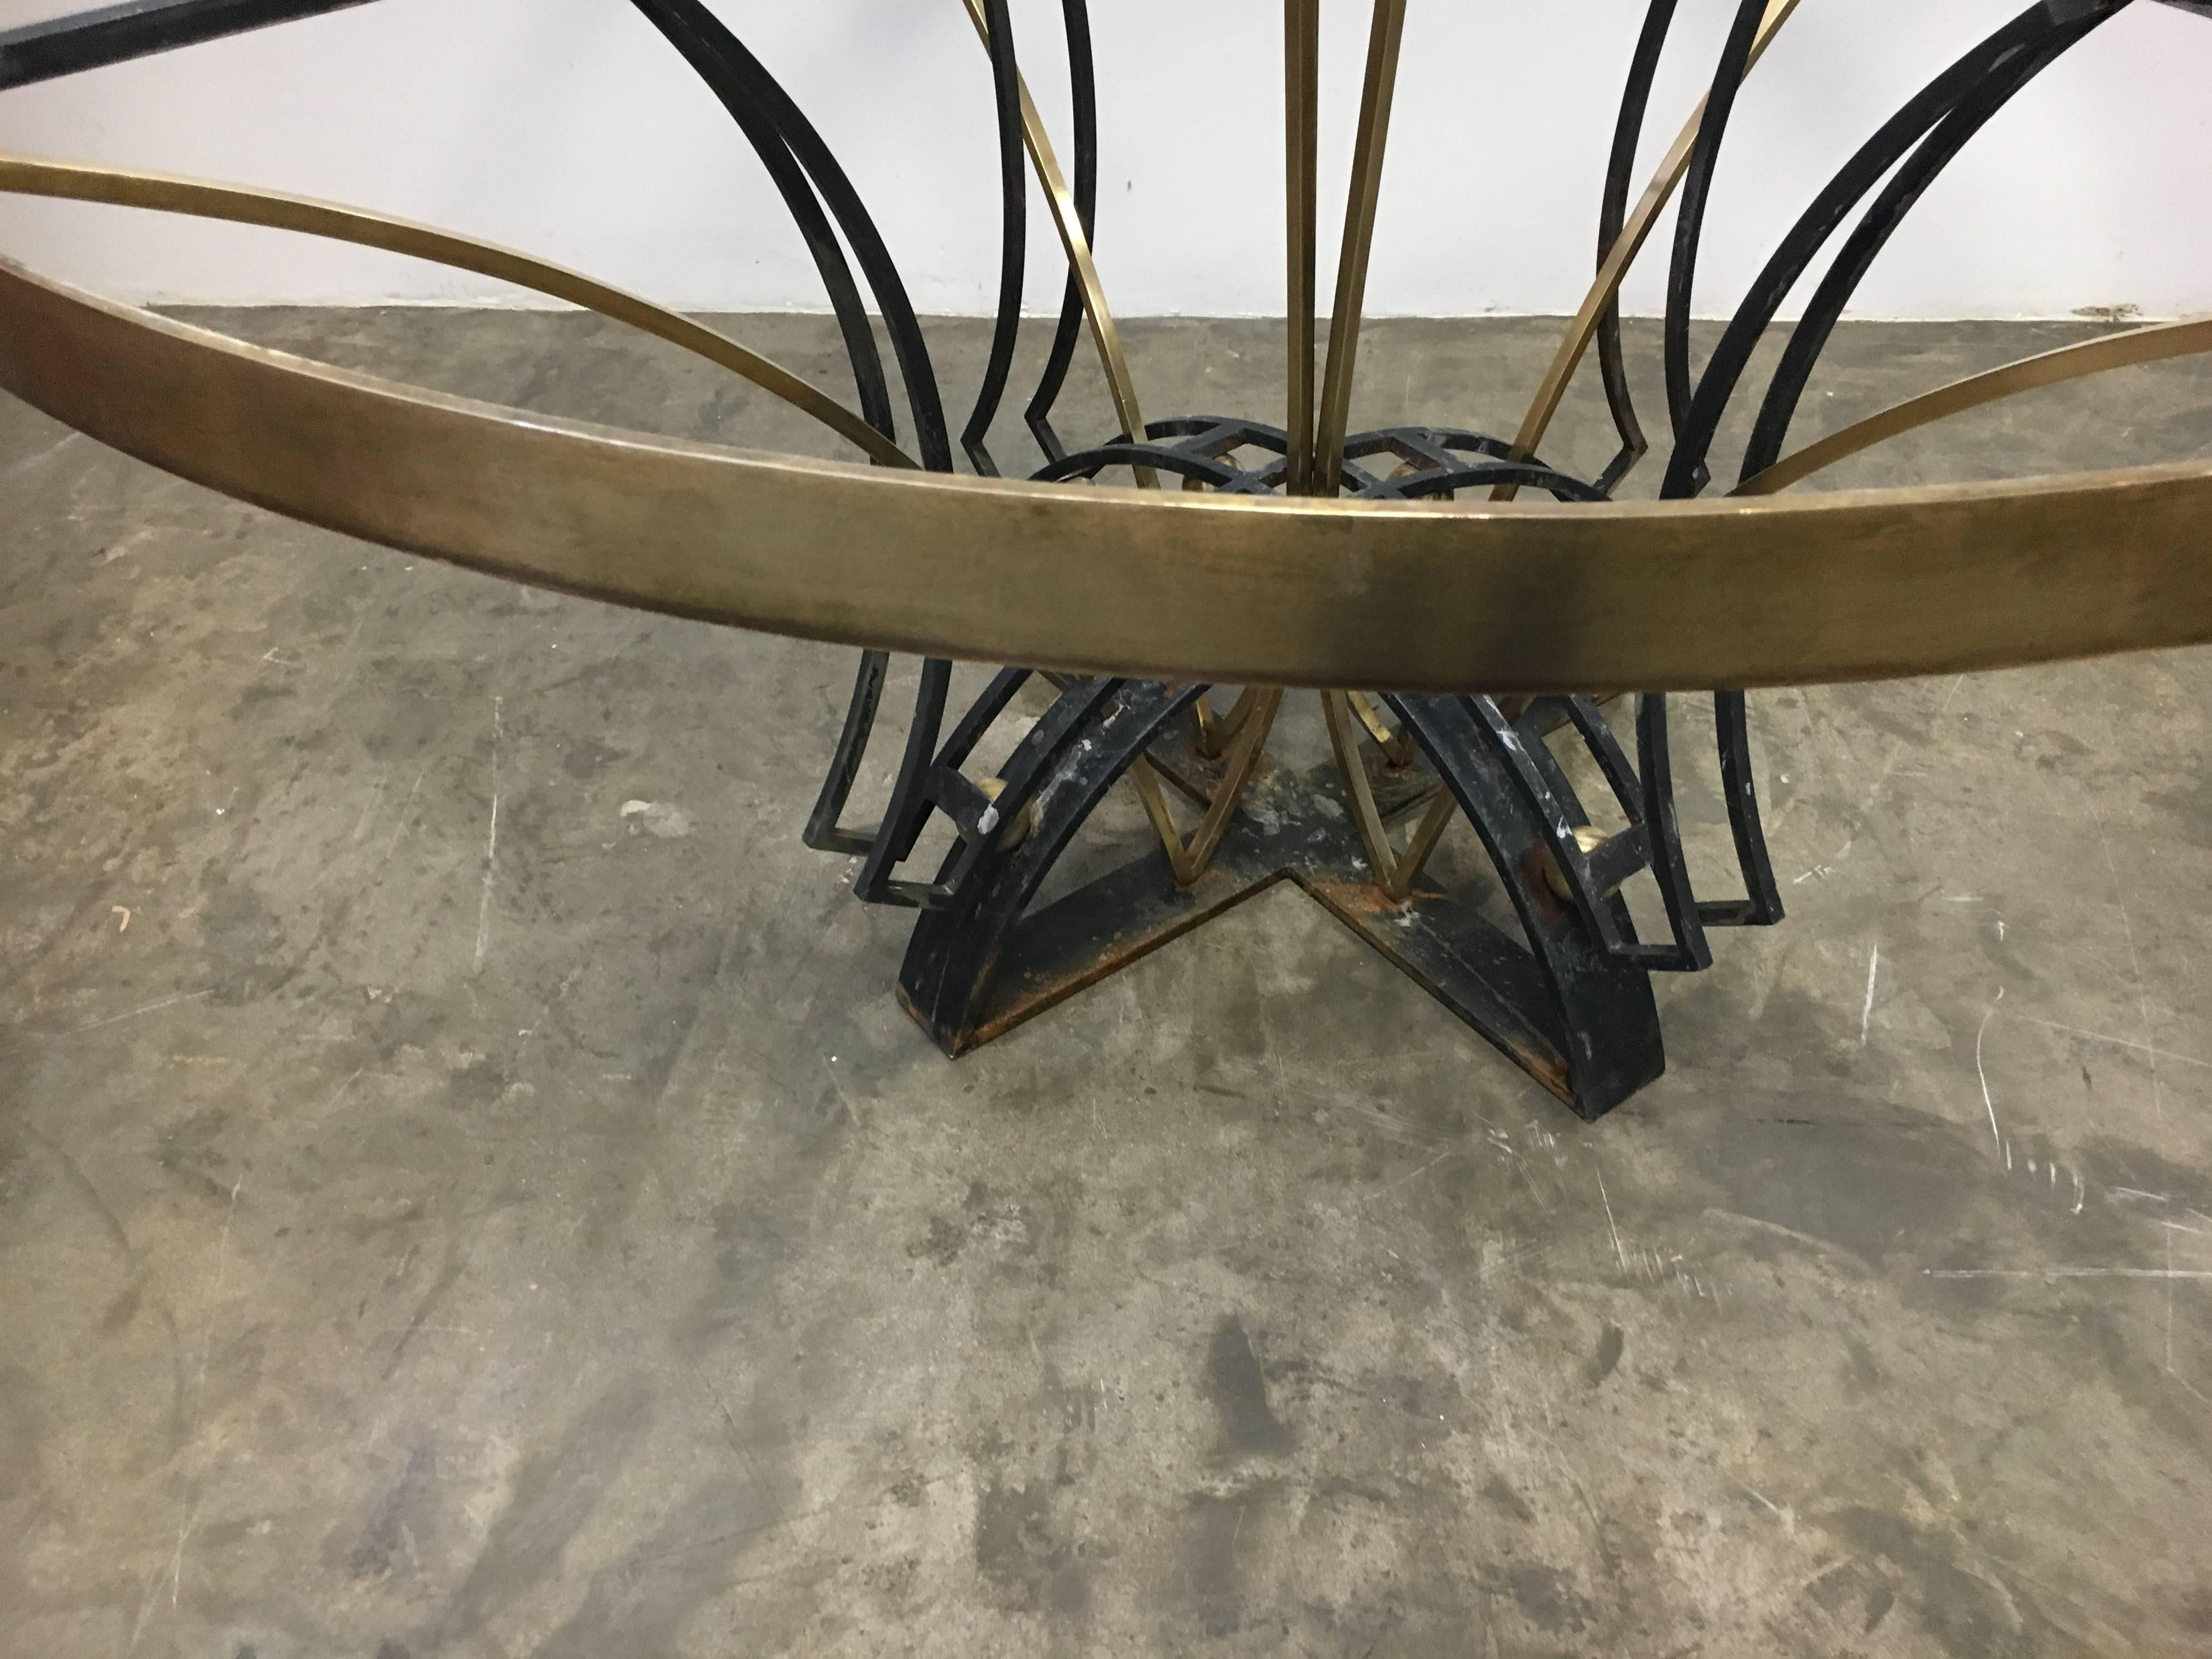 Superb Iron and Brass Round Dining Table by Arturo Pani, Mexico City circa 1950s For Sale 1